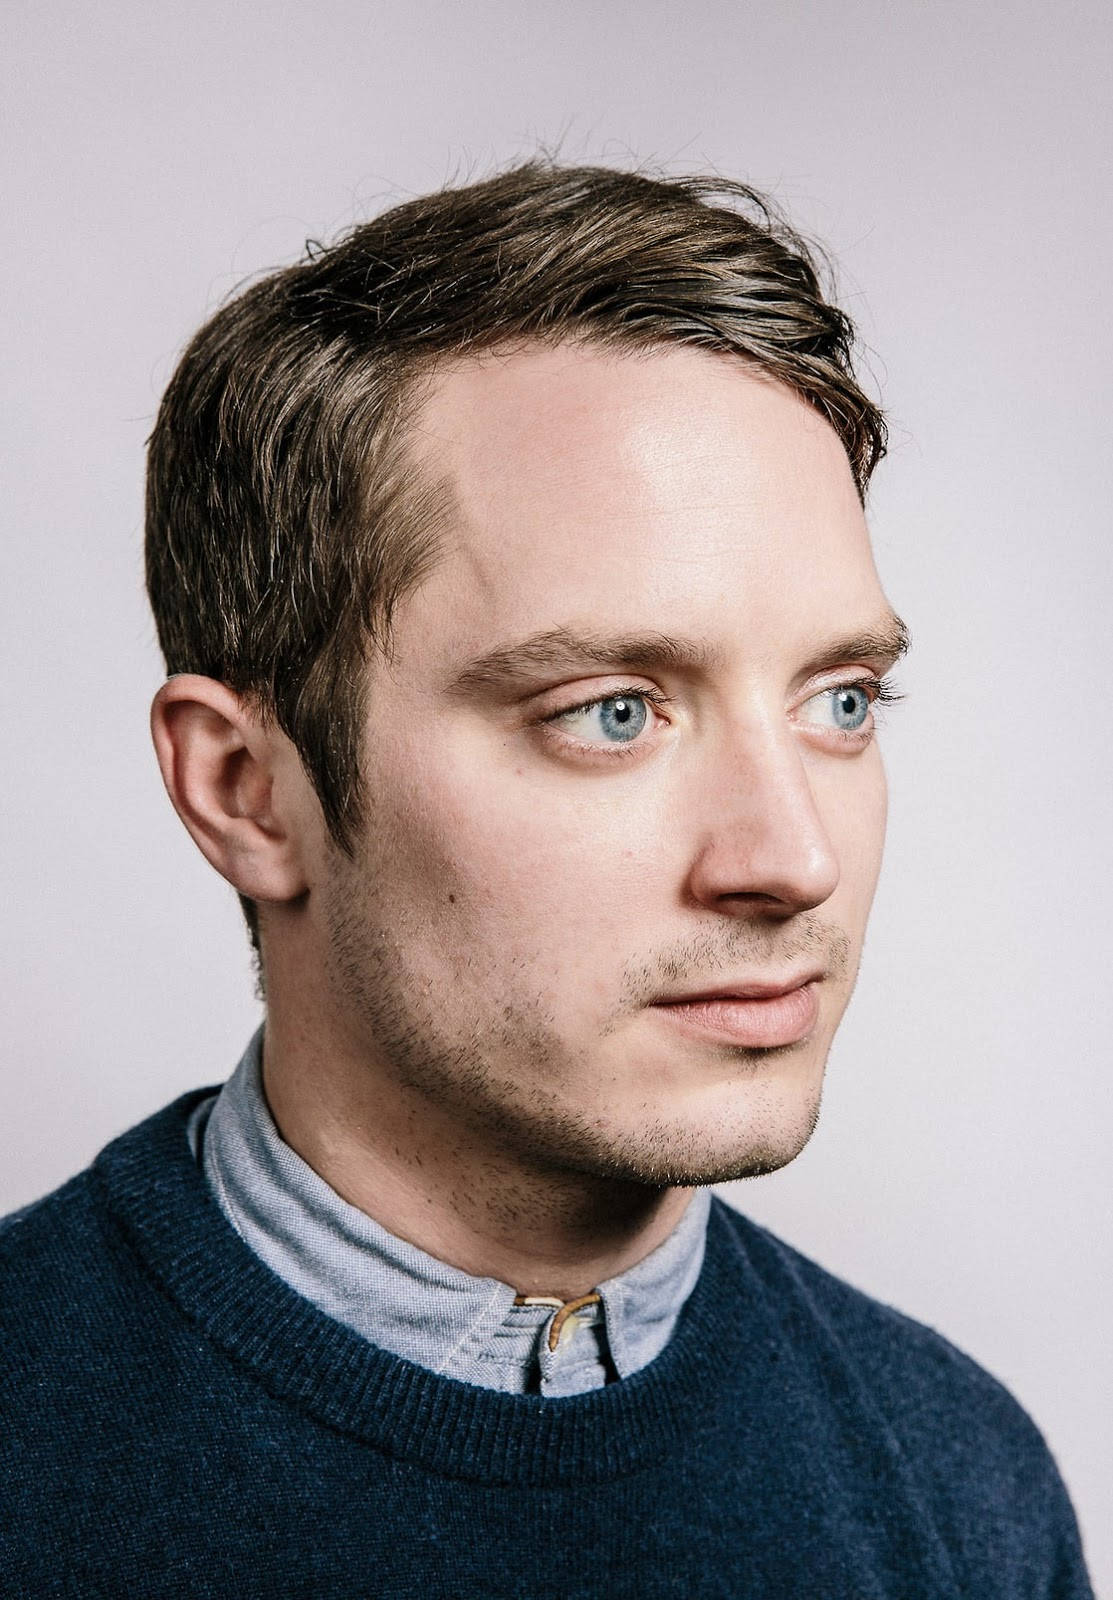 Download Elijah Wood On A White Background Wallpaper | Wallpapers.com